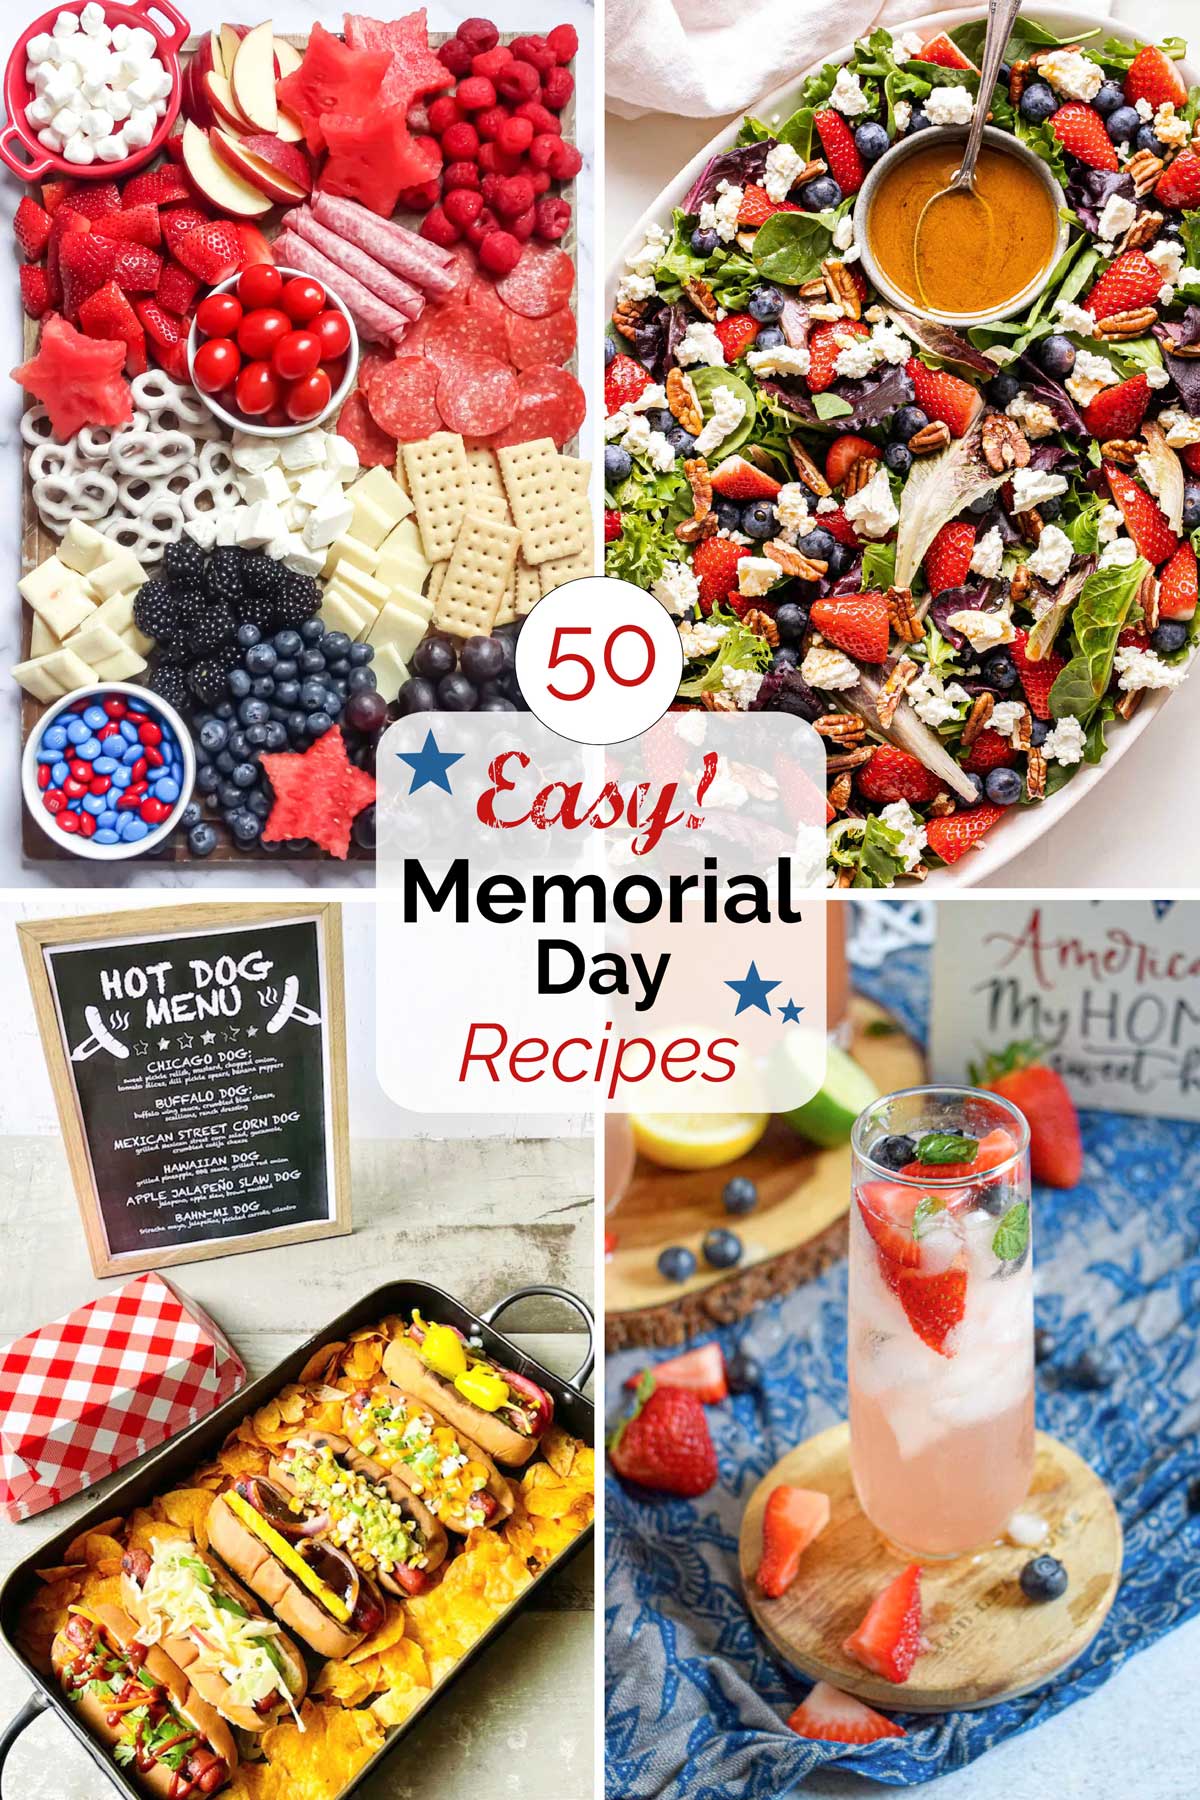 Collage of 4 of the recipes with graphic stars and text overlay 